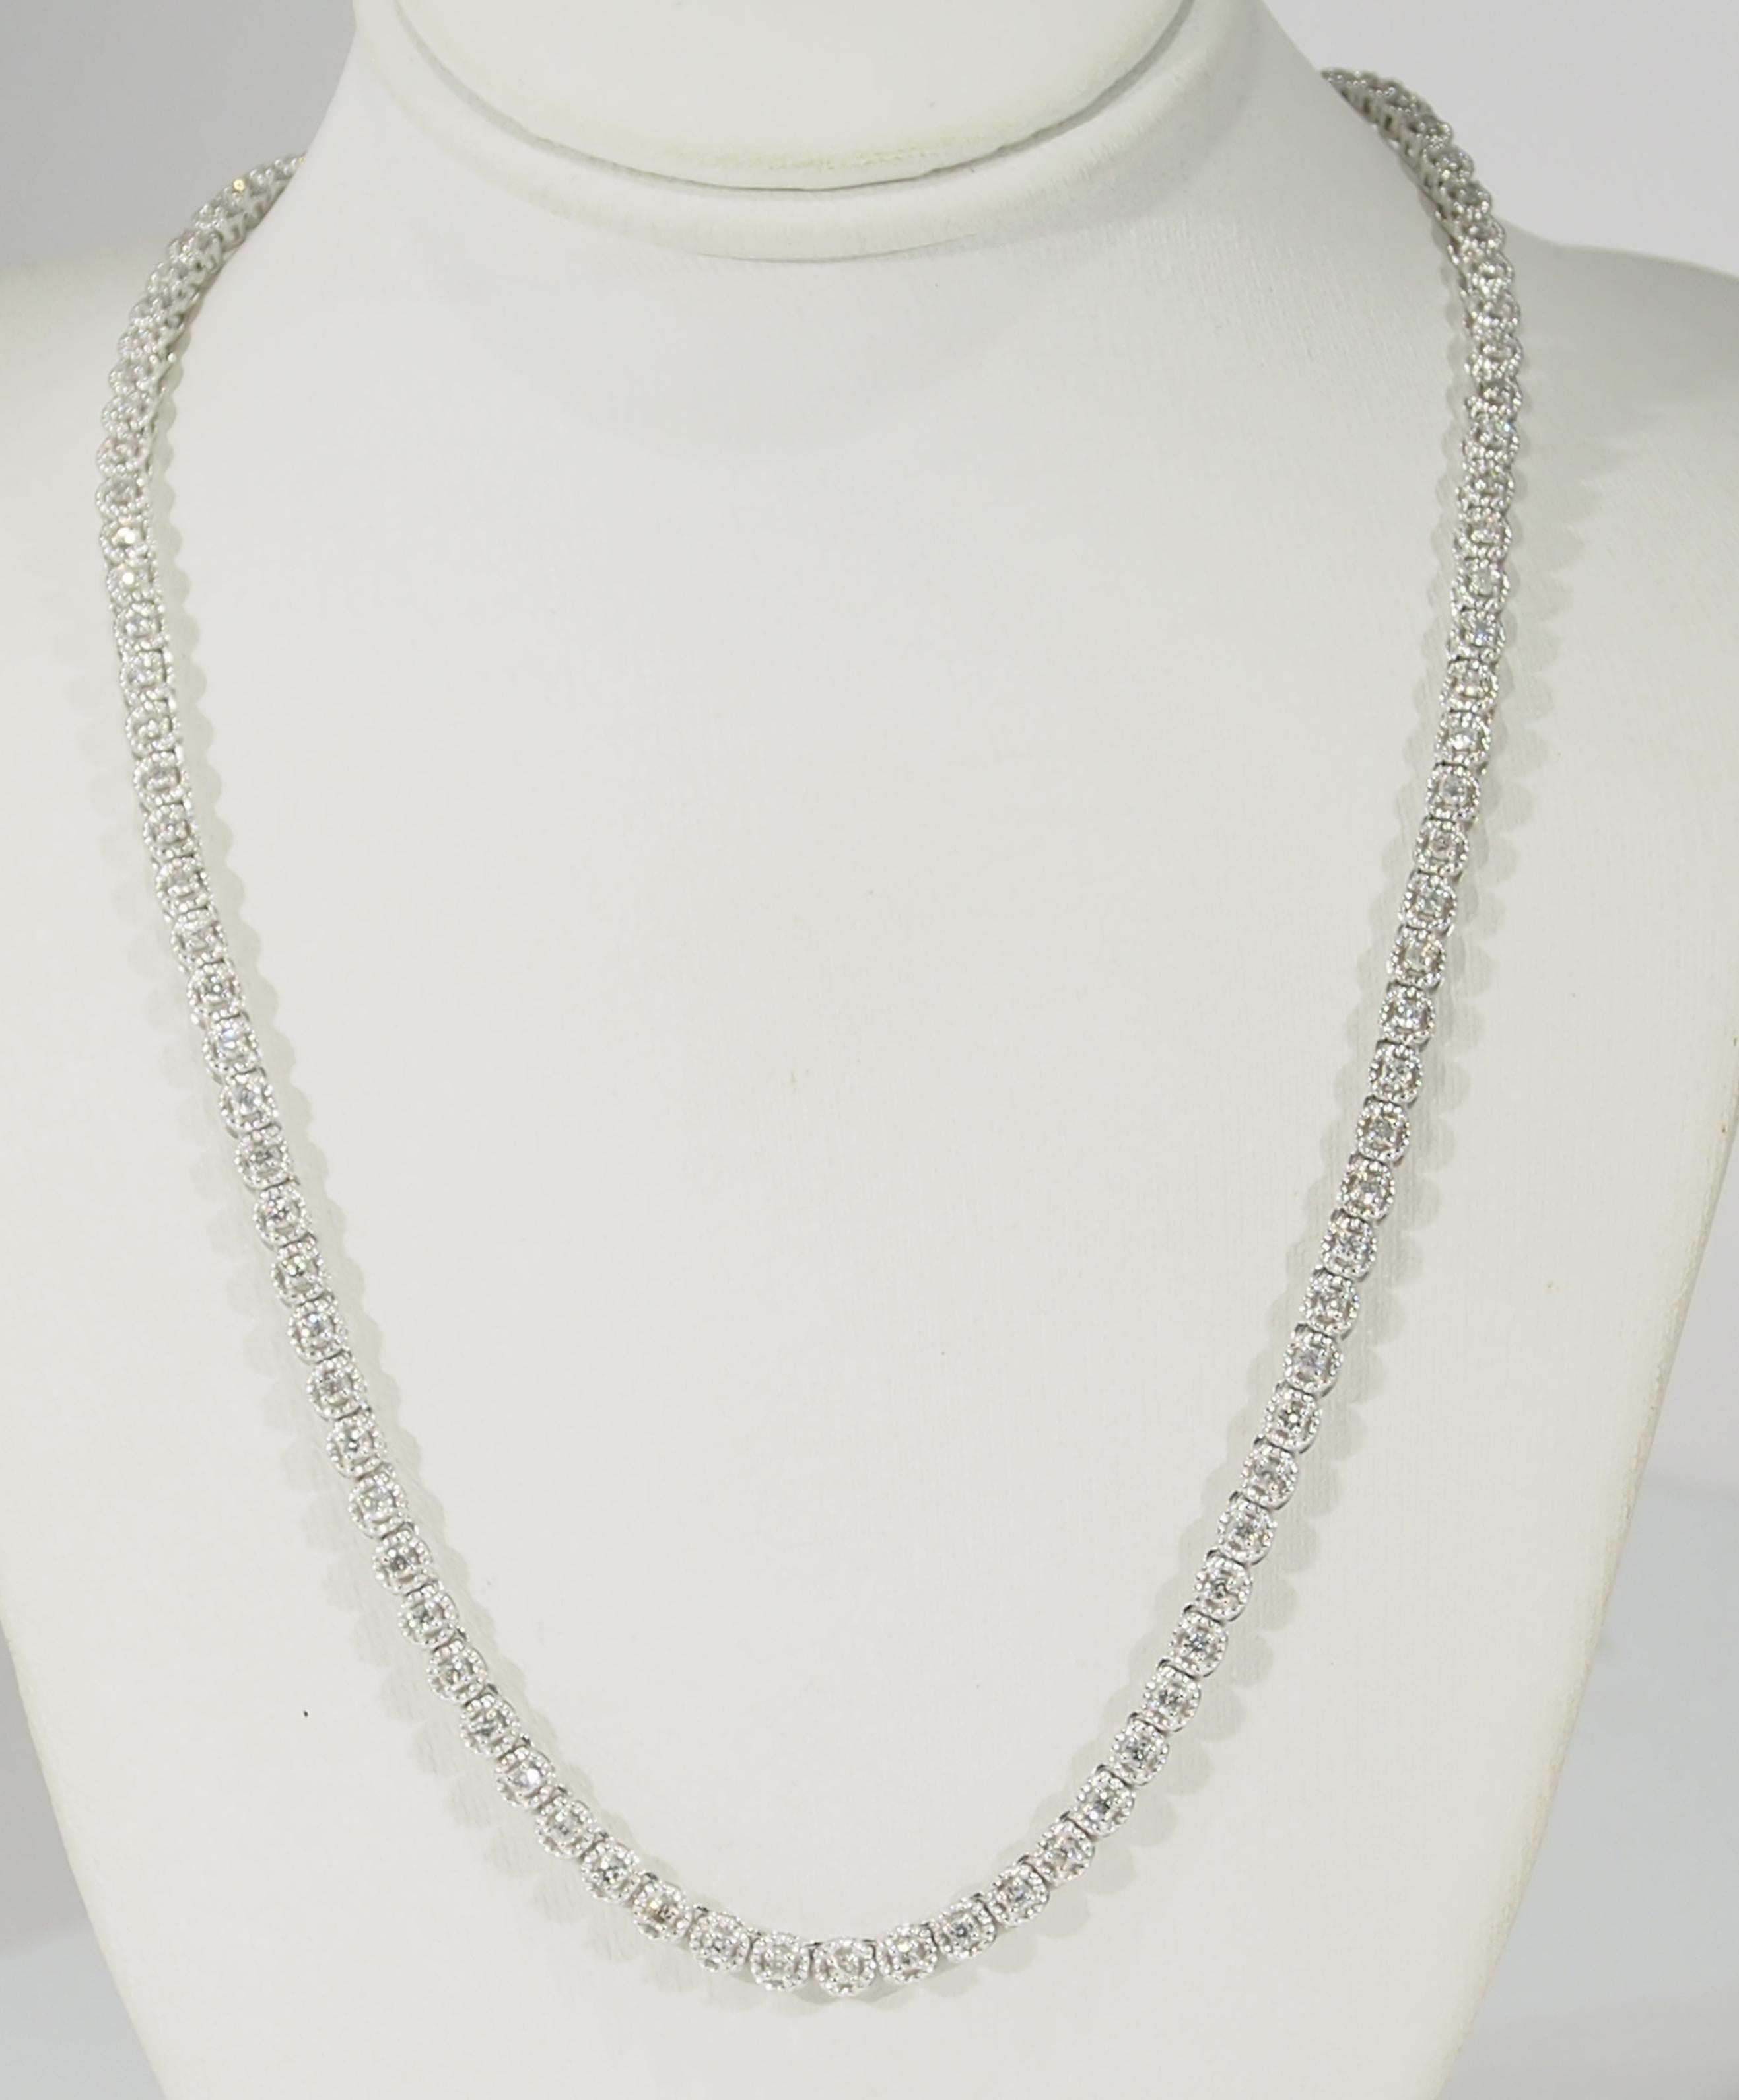 This is a lustrous 14K White Gold Tennis Necklace designed with Rope-Like settings encircling the 123 Round Brilliant Cut Diamonds, approximately 2.25ctw, G-H in Color, VS-SI3 in Clarity allowing this Necklace to Sparkle in a 17 inch length. An